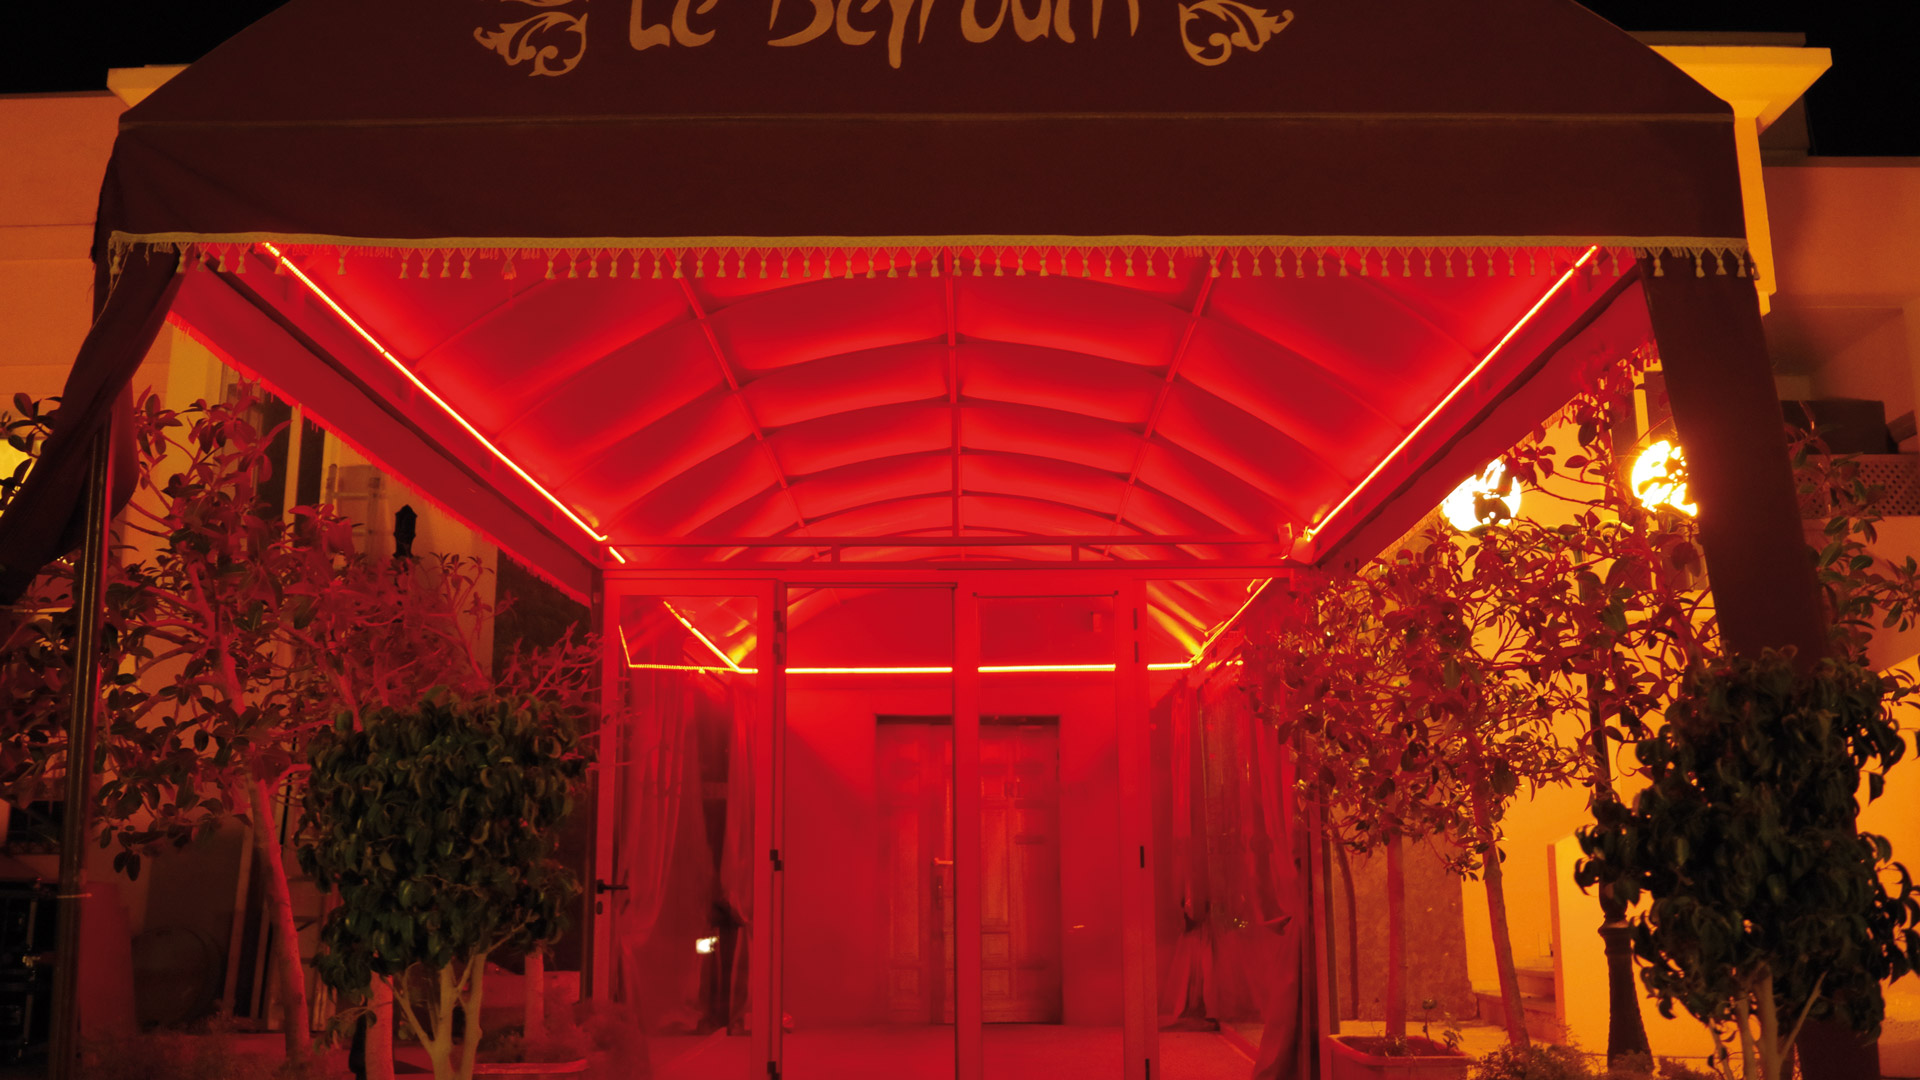 The entrance to the Layali Beirut club in Tunis. 